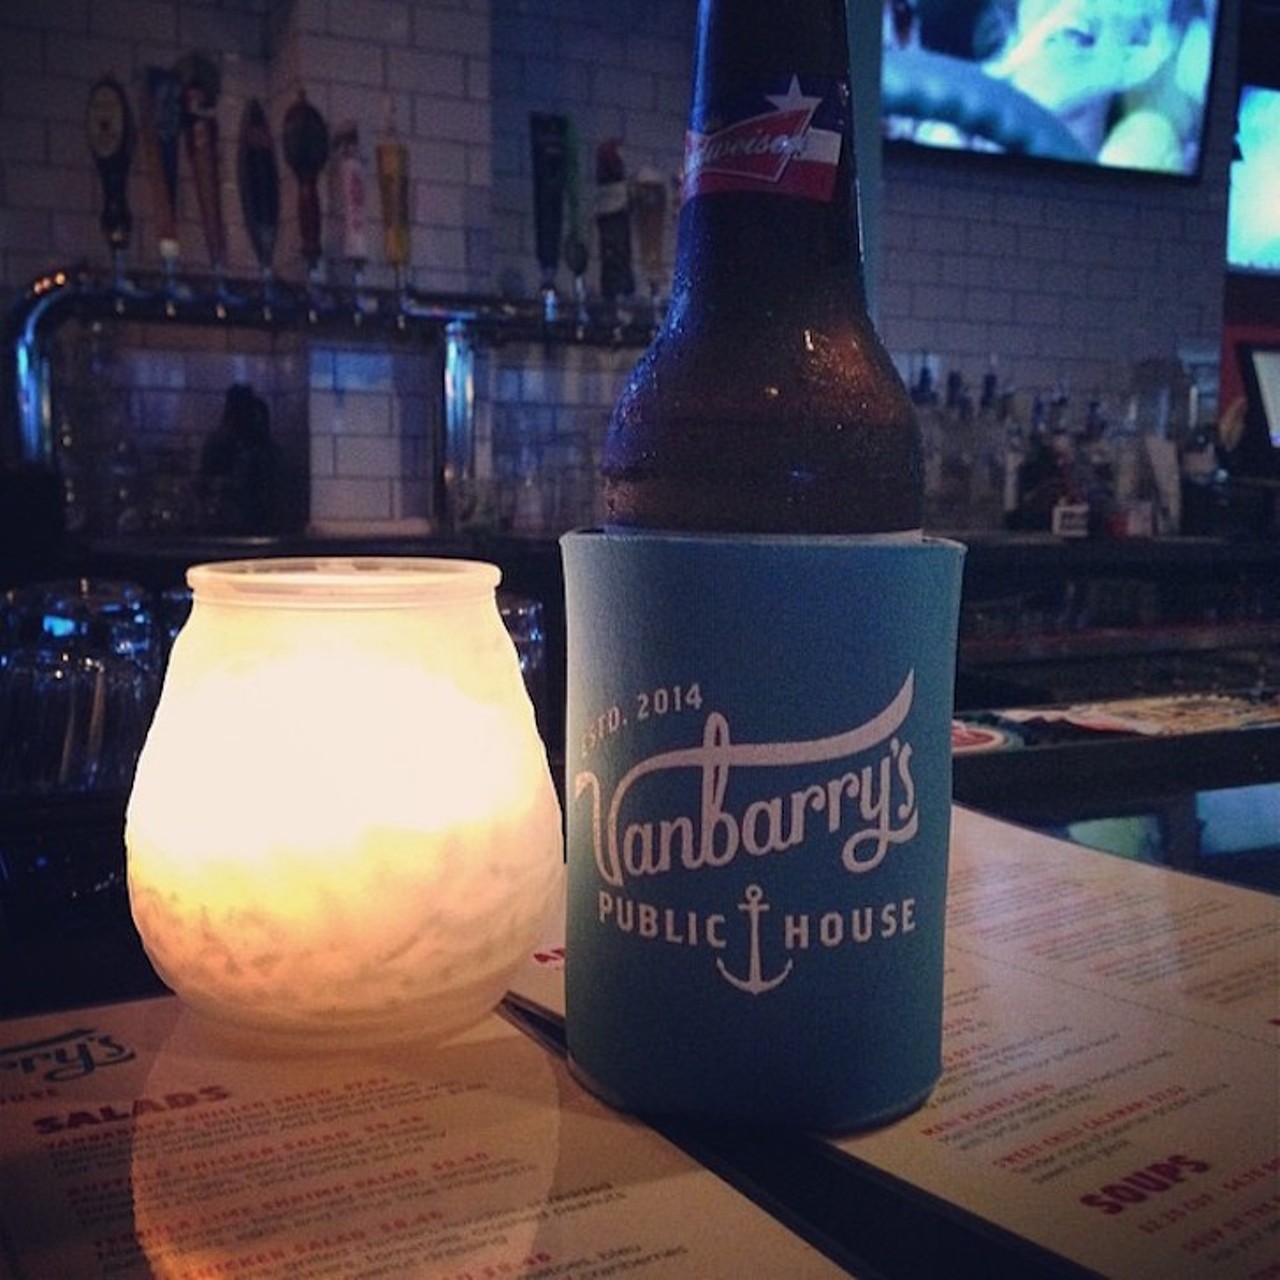 Vanbarry's Public House
4120 S. Orange Ave., 407-704-8881
10 TVs
Besides having a nice spread of TVs, Vanbarry's also has a nice spread of bar food. Snack on some flatbreads, tacos or fajitas while you watch the game. 
Photo via kelly_f_baybay/Instagram